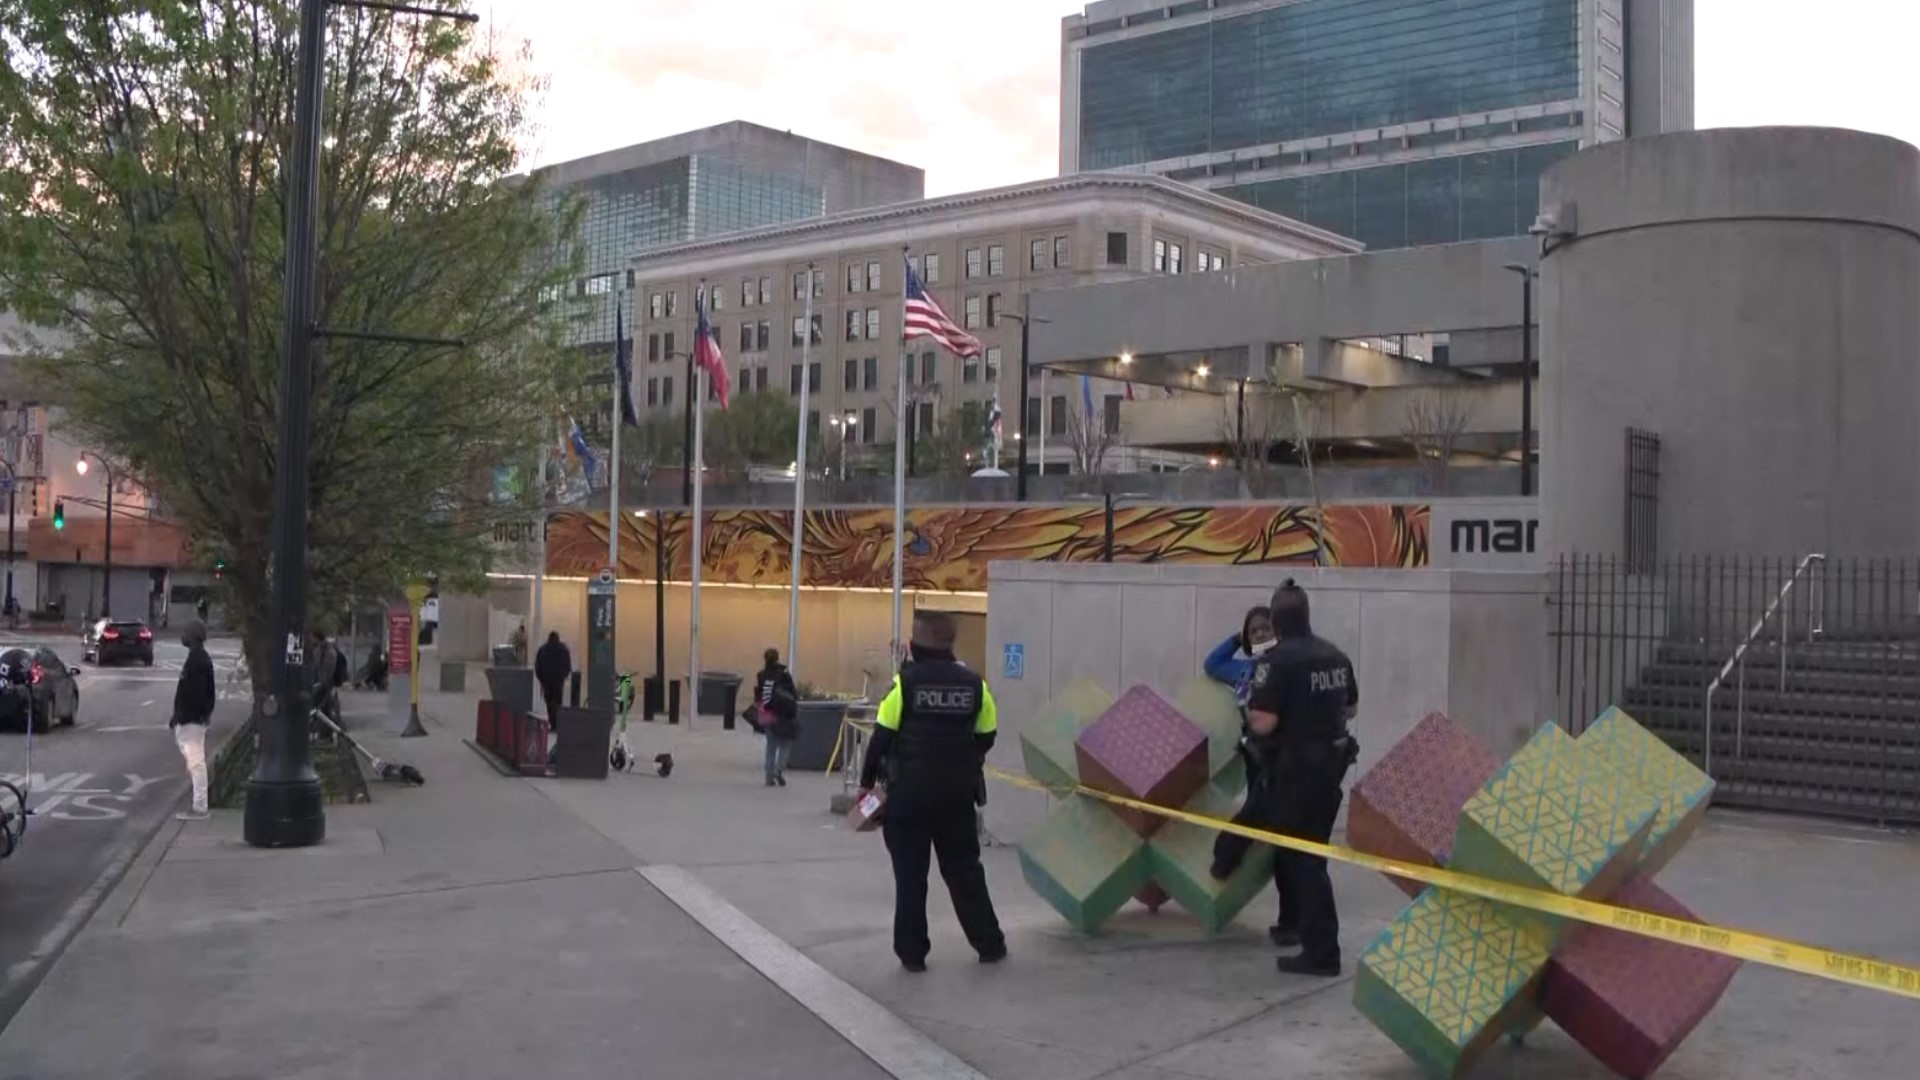 An argument broke out near the MARTA station in Five Points, leading to a deadly shooting Thursday, according to the MARTA Police Department.